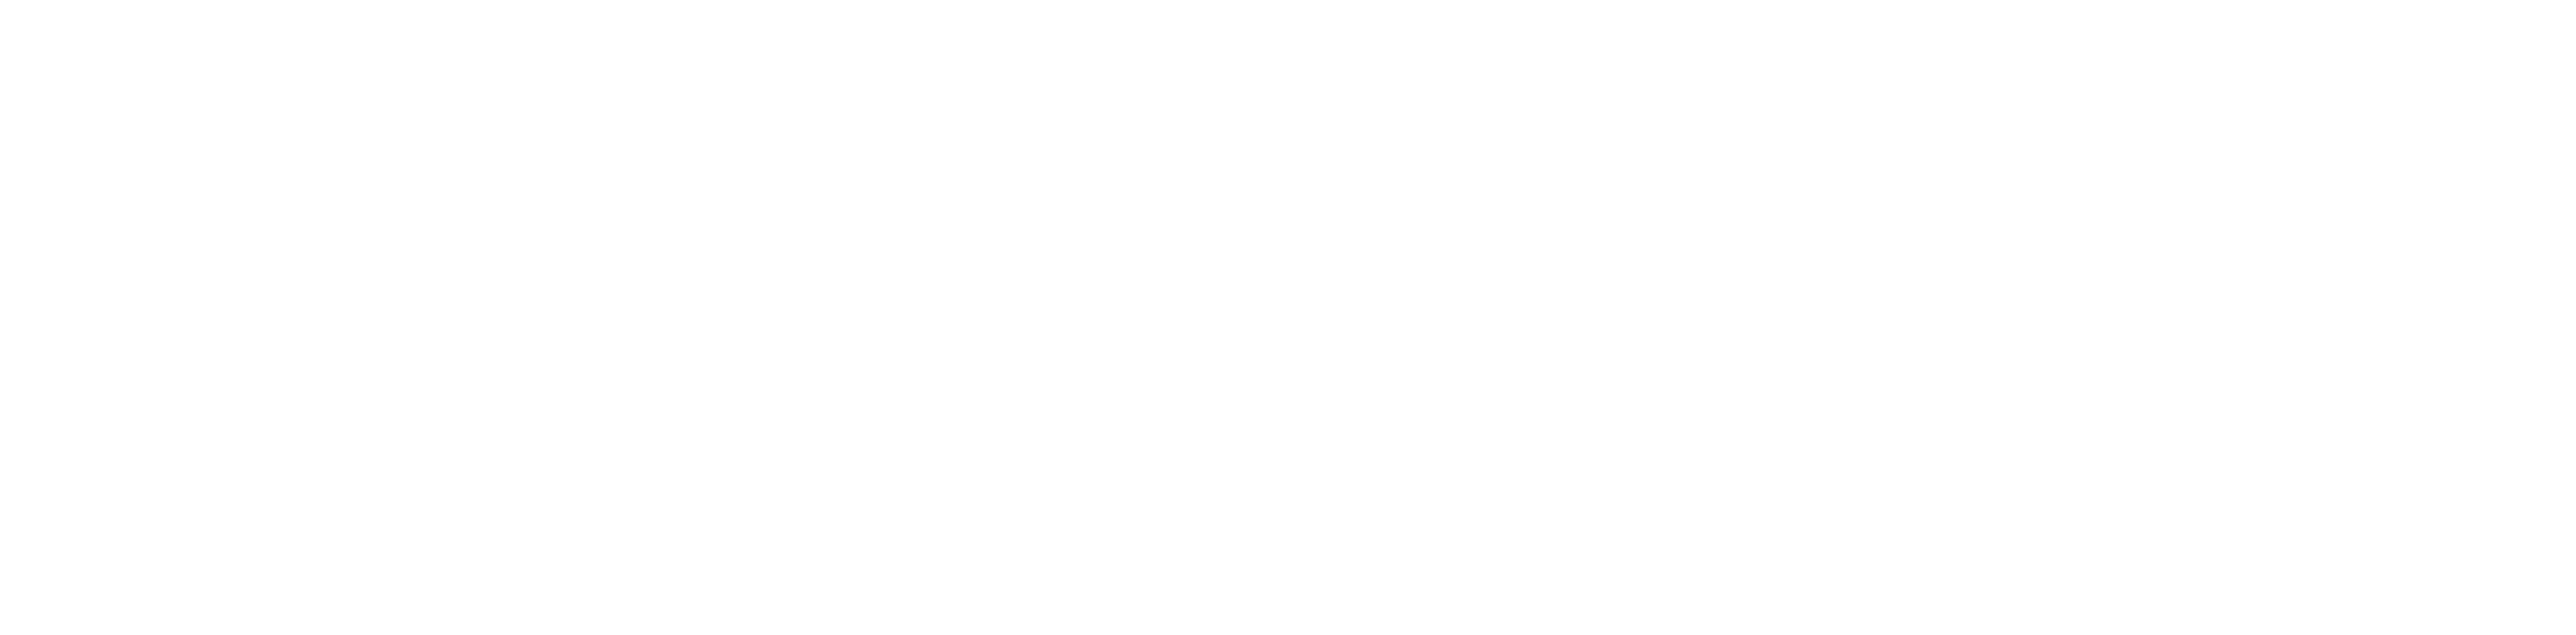 How Stitch Fix Simplified Cloud Cost Monitoring And Management header sub image